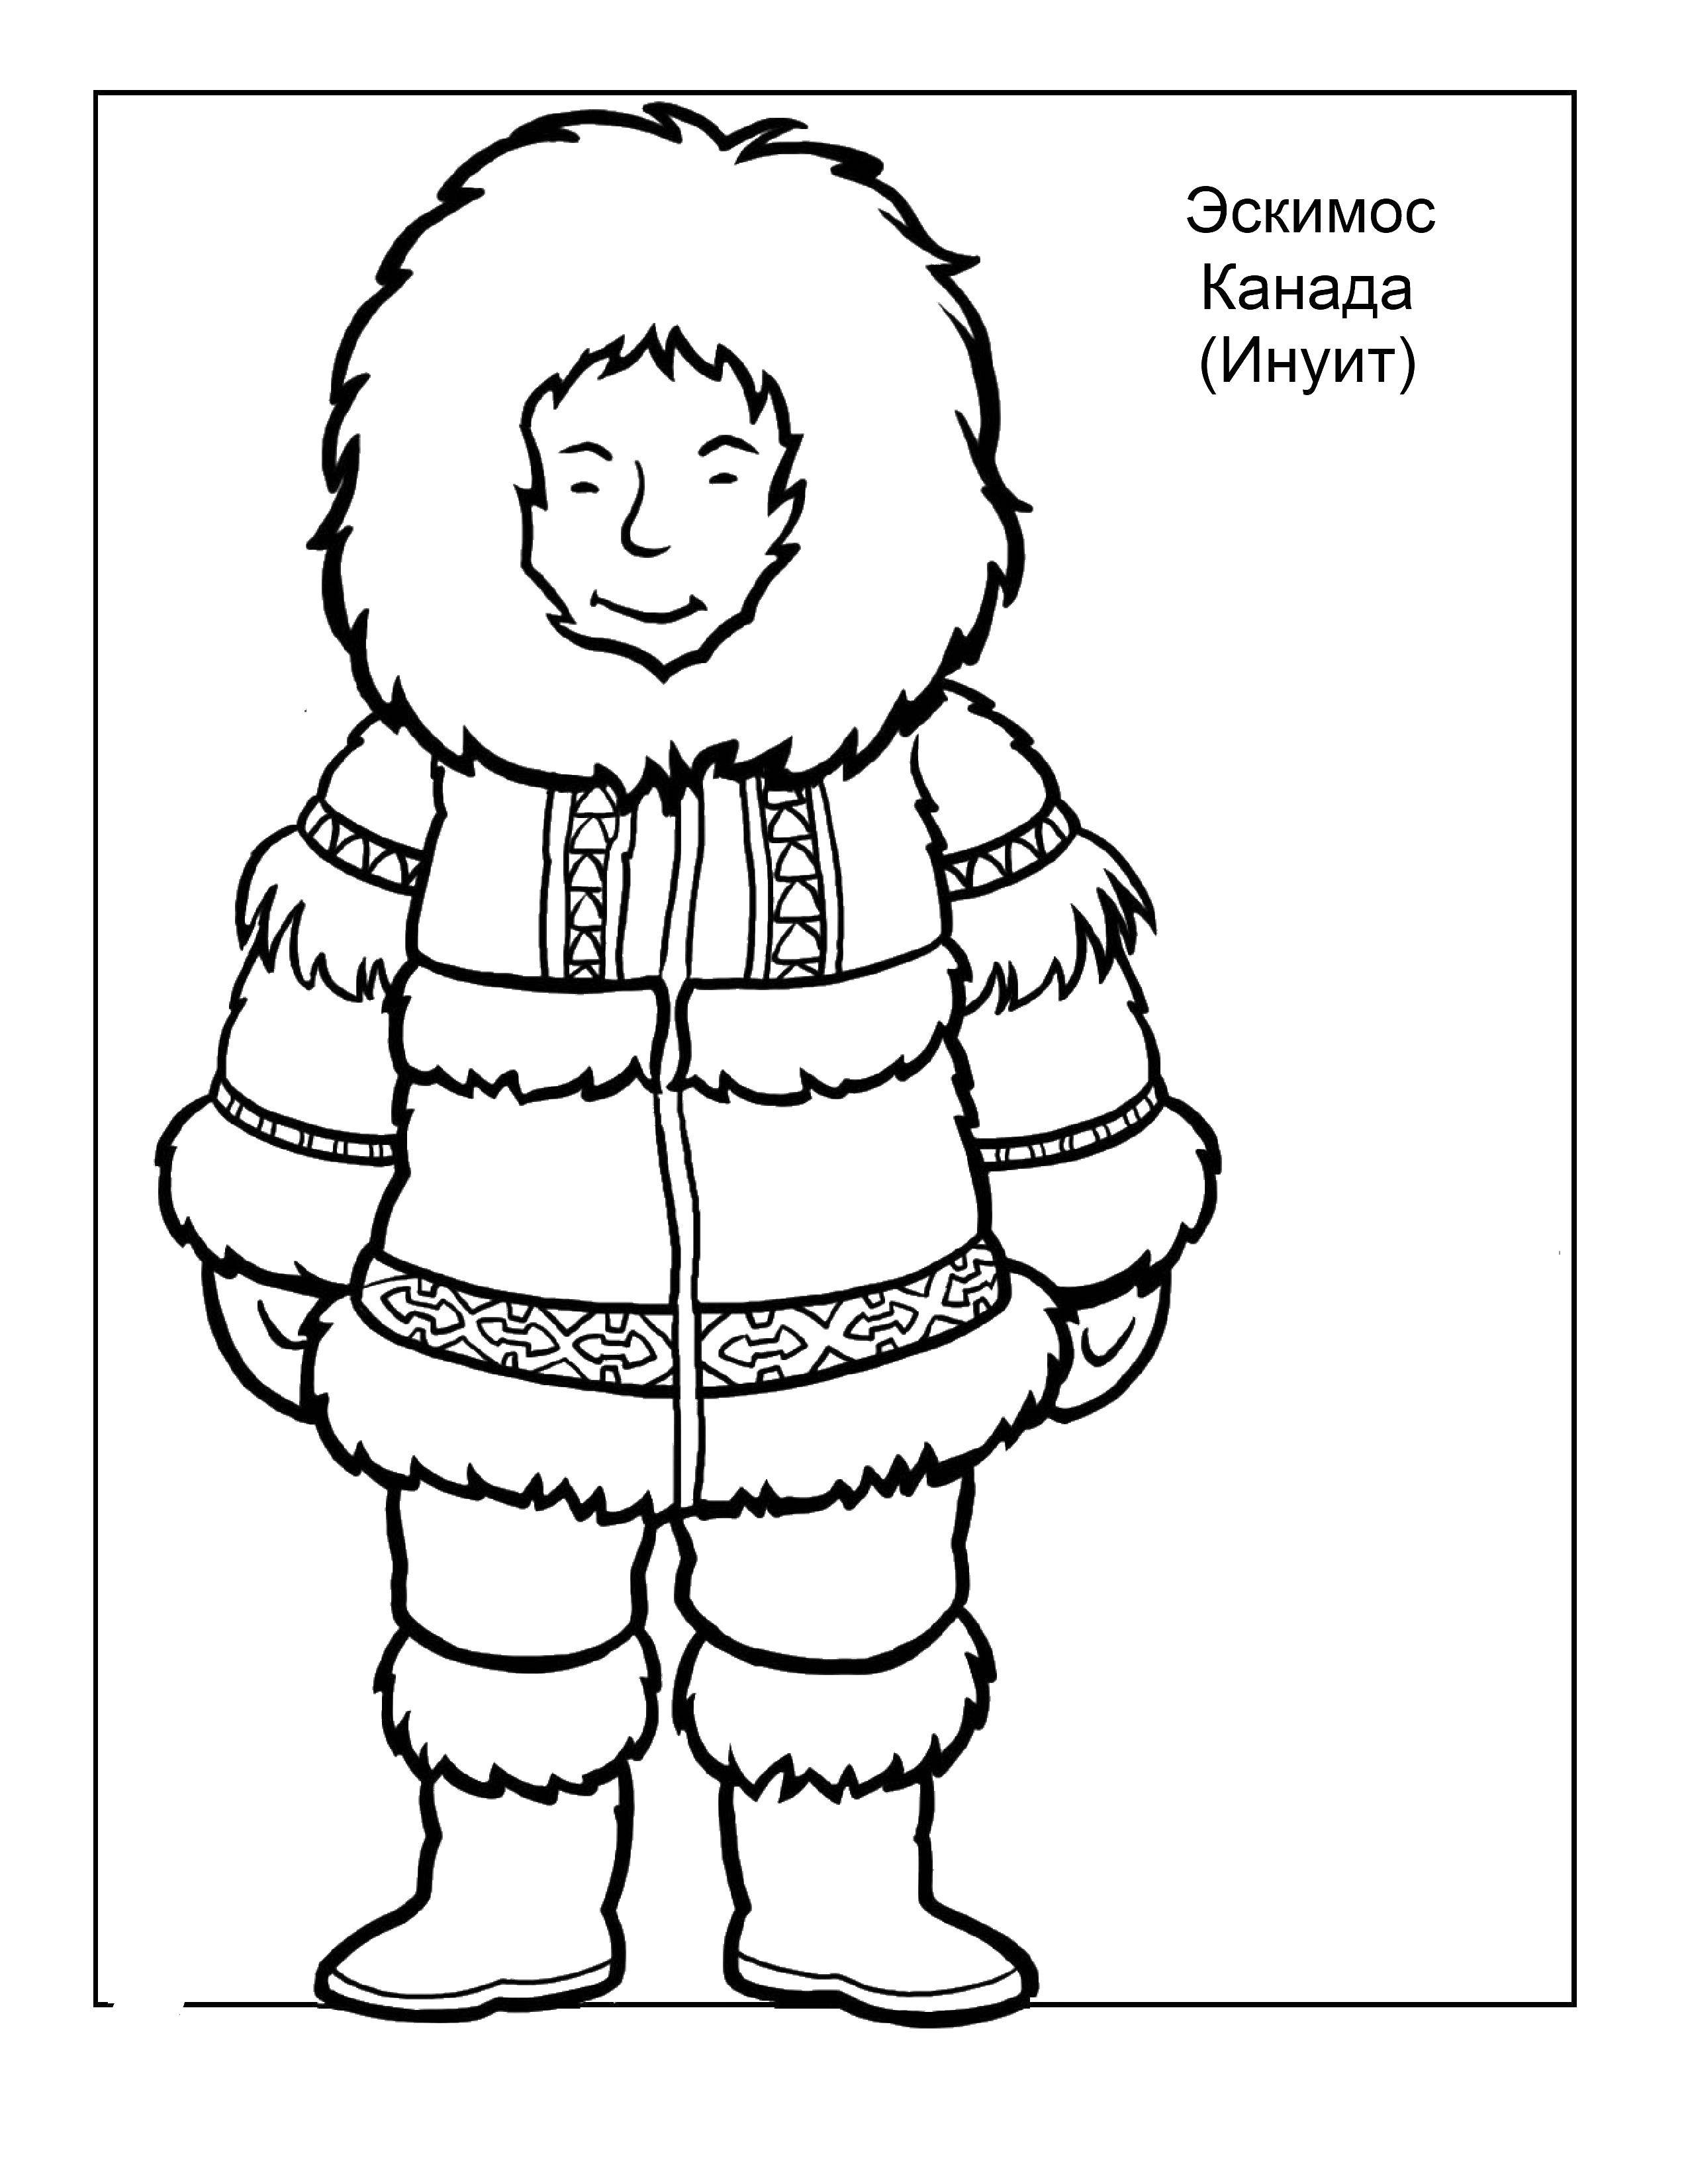 Coloring The canadian eskimo. Category The culture of different countries of the world . Tags:  Canada, eskimo.